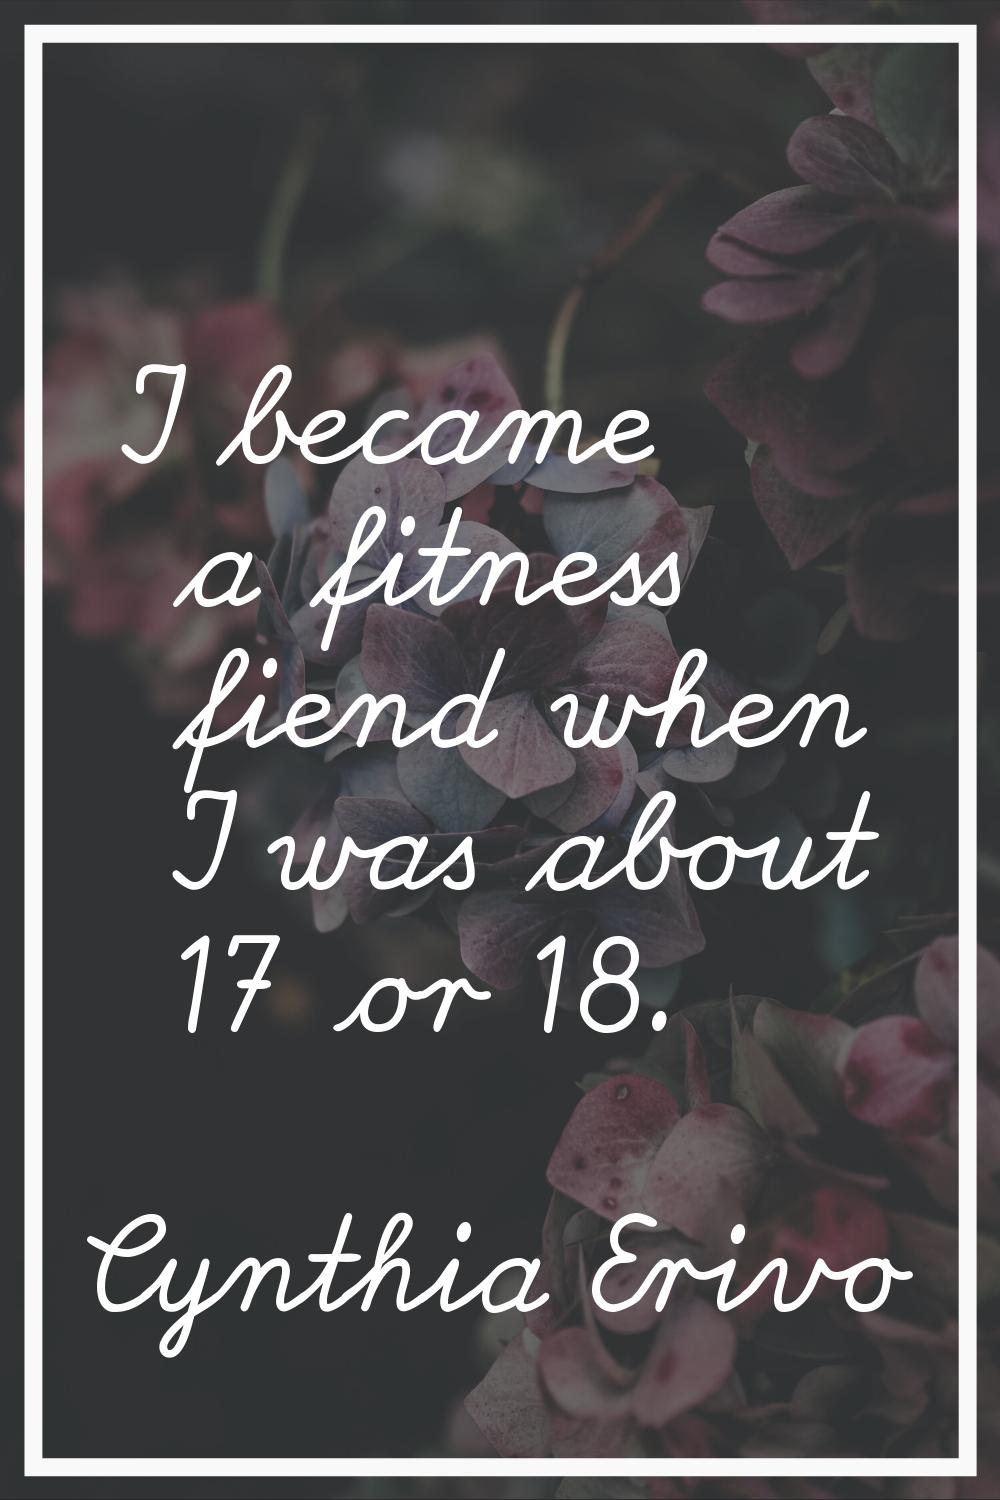 I became a fitness fiend when I was about 17 or 18.